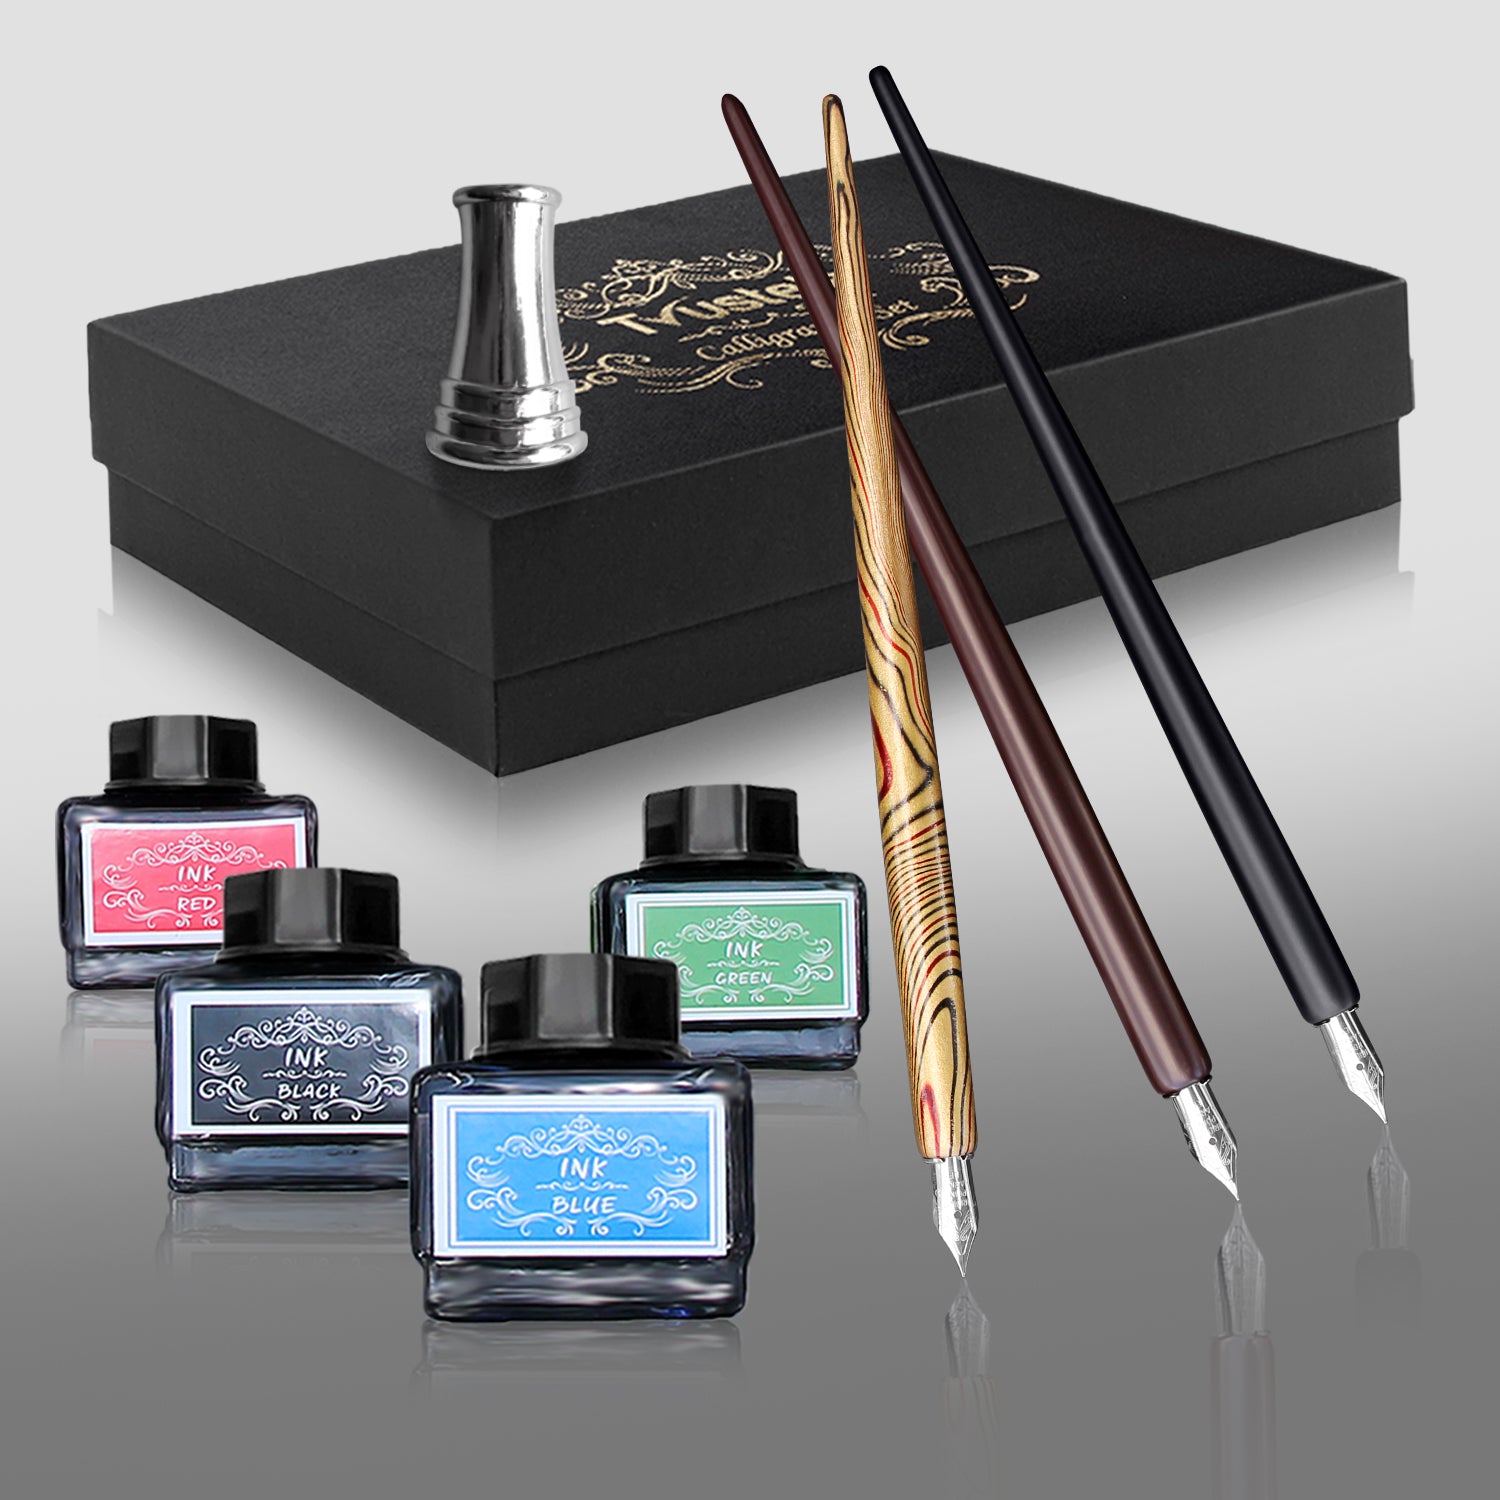 Jixiangdou Calligraphy Ink,12 Colors Dip Calligraphy Pen Inks Set for  Art,Writing,Signatures,Calligraphy, Decoration, Gift (15ml)